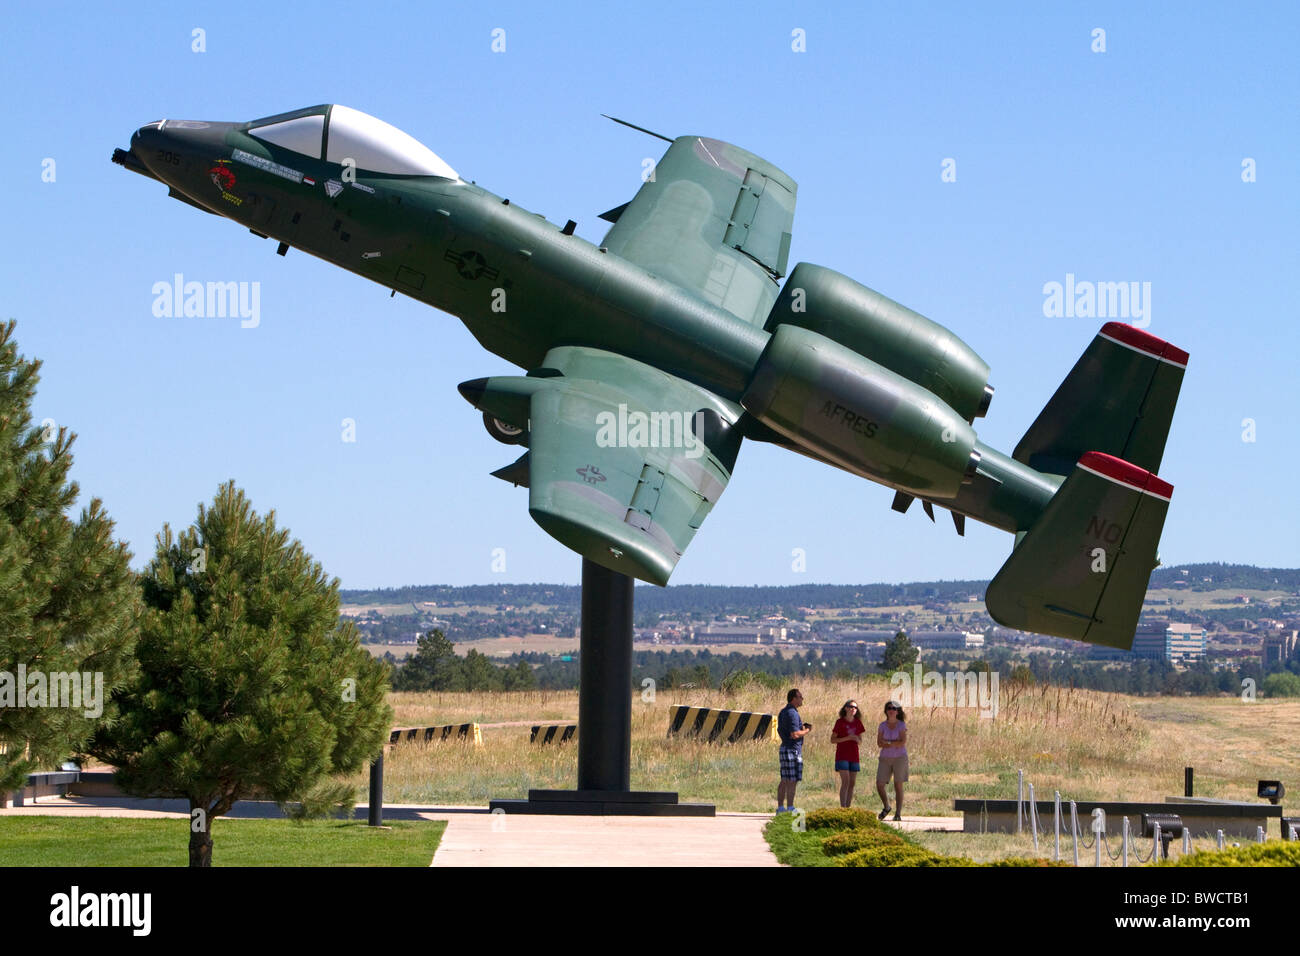 A-10 Thunderbolt II Jet-Flugzeuge angezeigt bei der Air Force Academy in Colorado Springs, Colorado, USA. Stockfoto